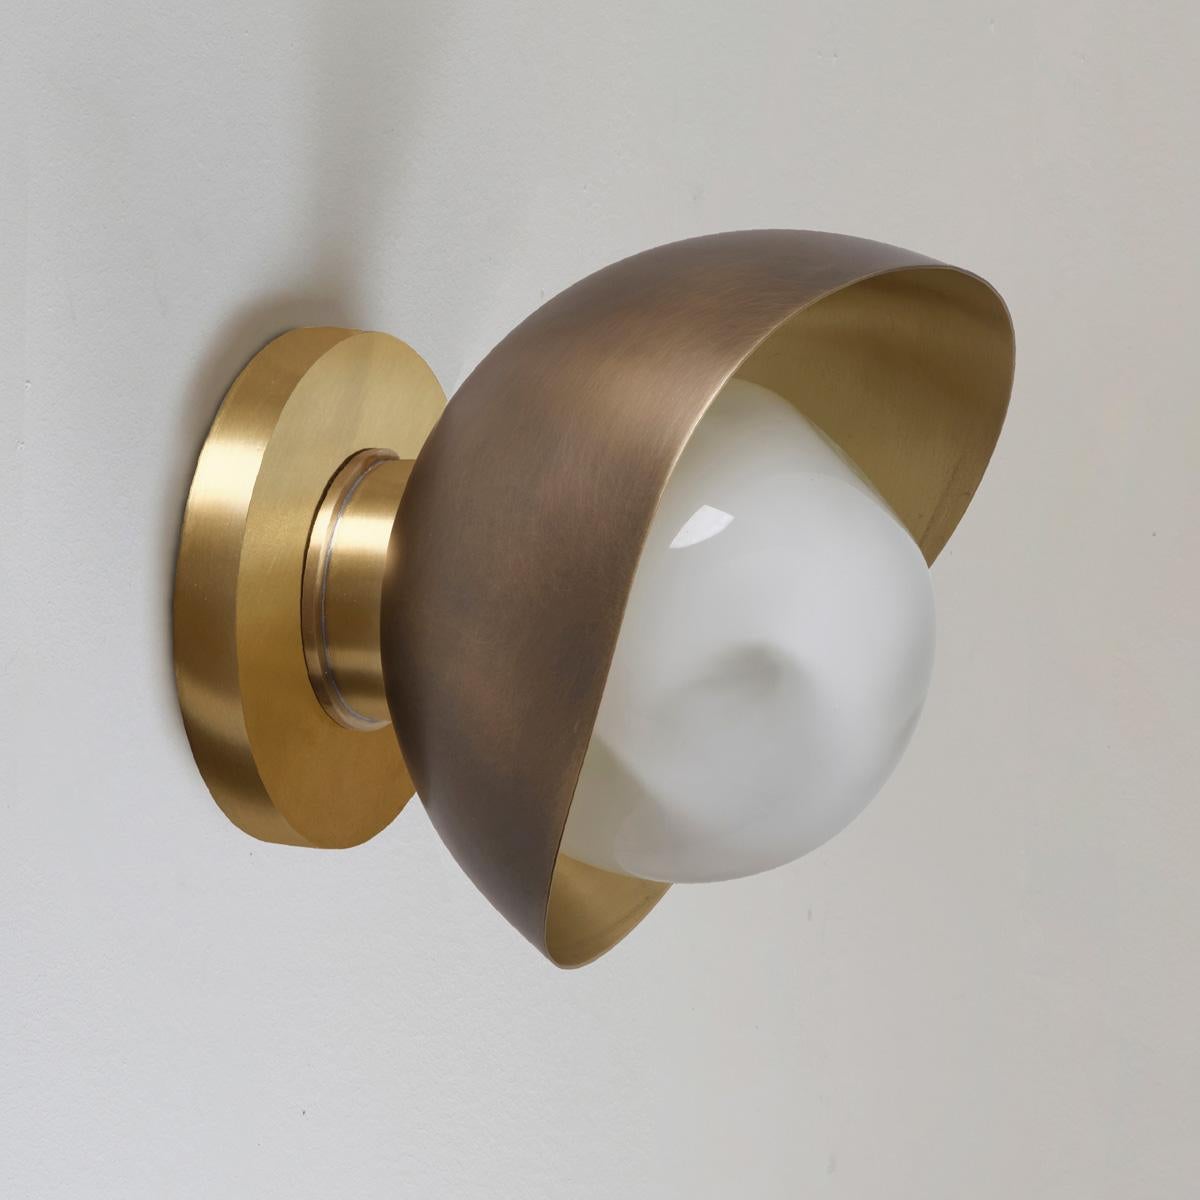 Contemporary Perla Mini Wall Light by Gaspare Asaro. Black and Polished Brass Finish For Sale